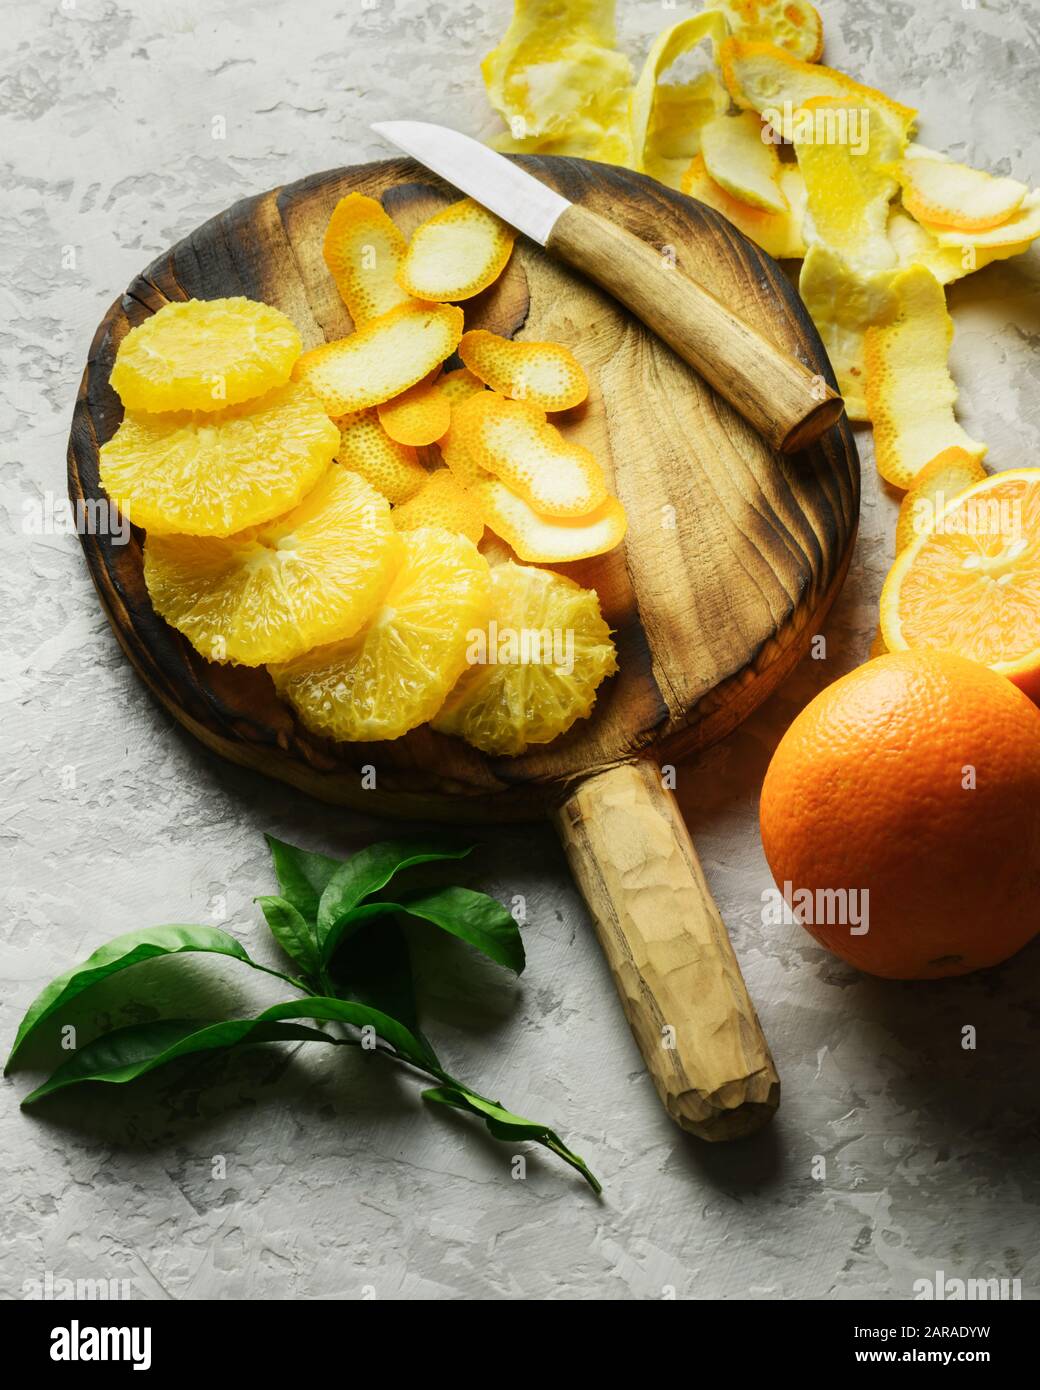 Orange pieces on grey plate closeup. Healthy diet vitamin concept. Food photography Stock Photo